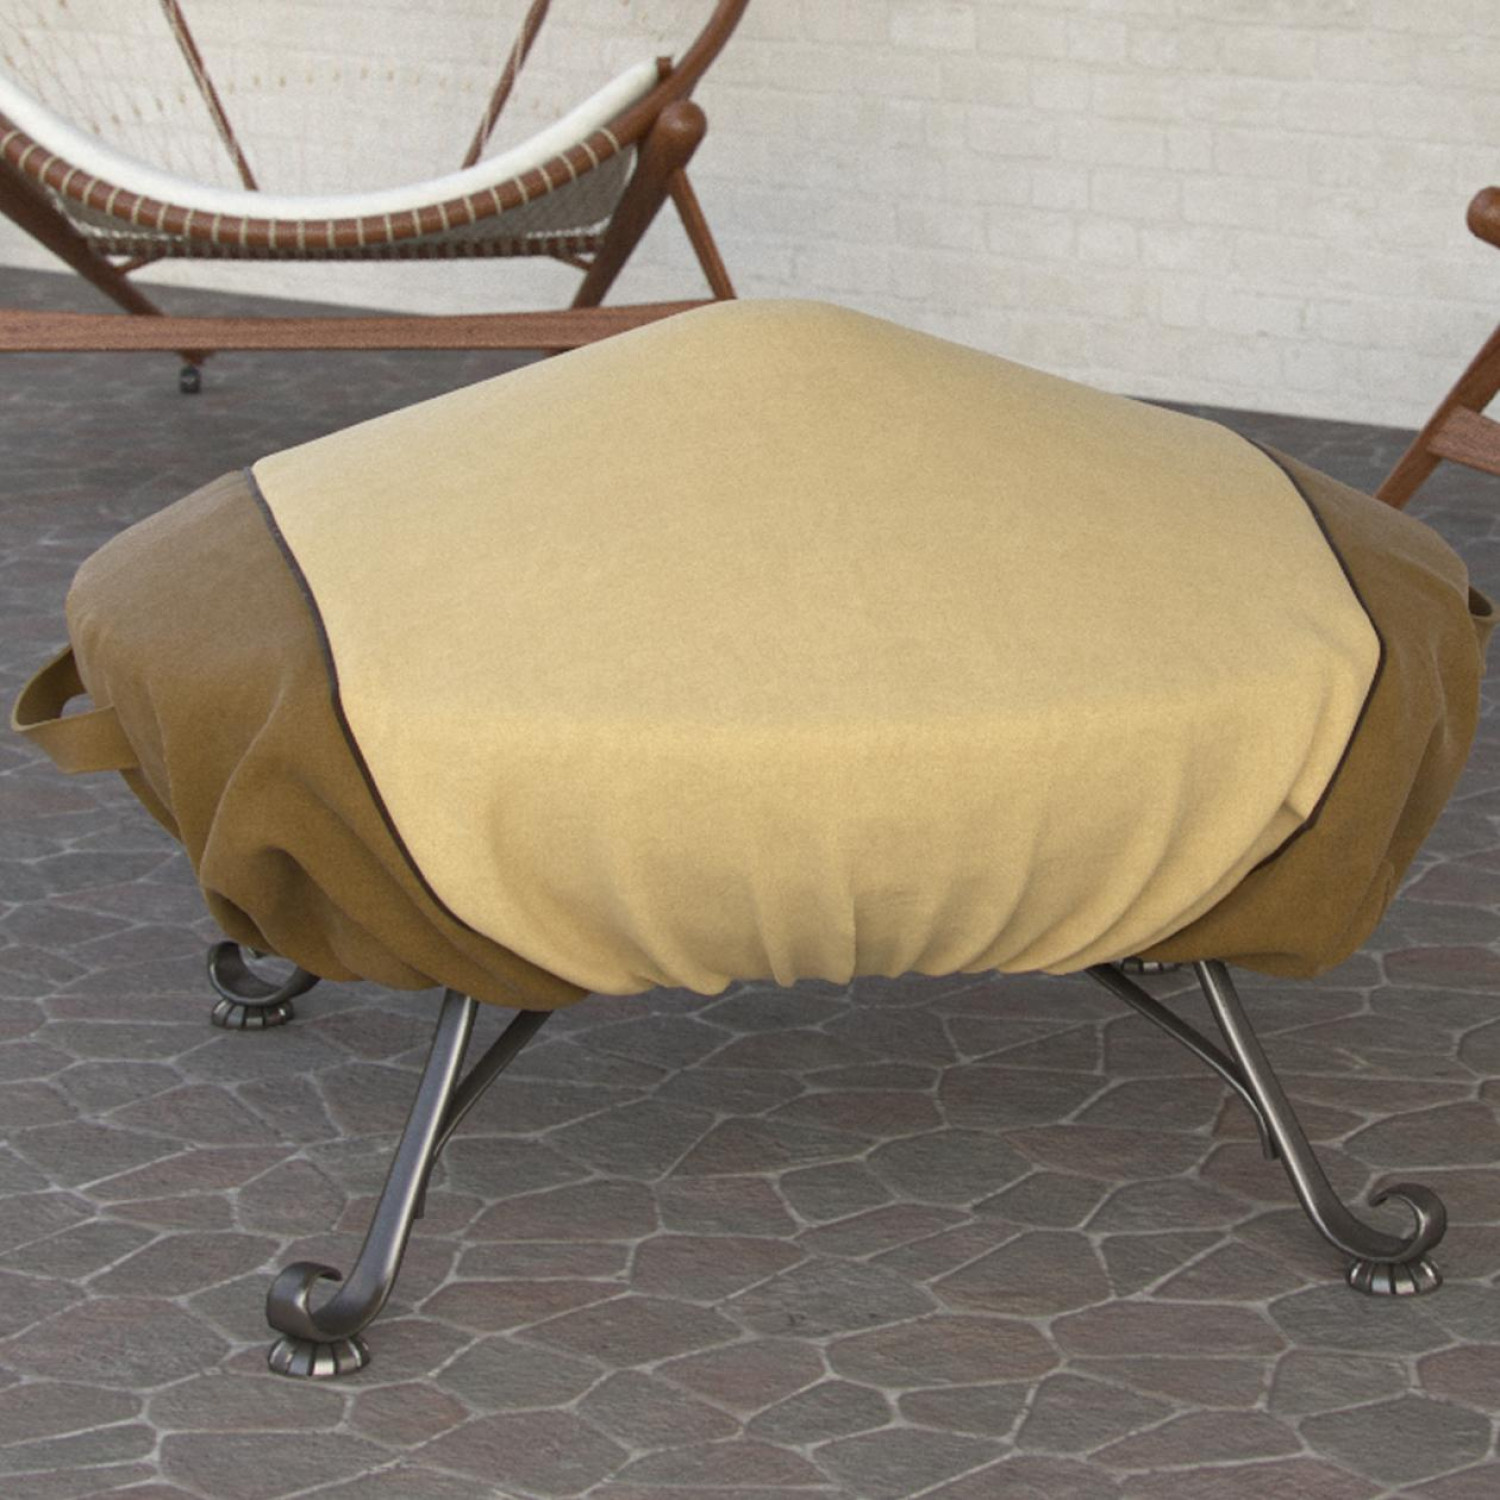 Dura Covers Fade Proof Two Tone 60" Heavy Duty Round Fire Pit Cover - Durable and Water Resistant Firepit Cover, Large